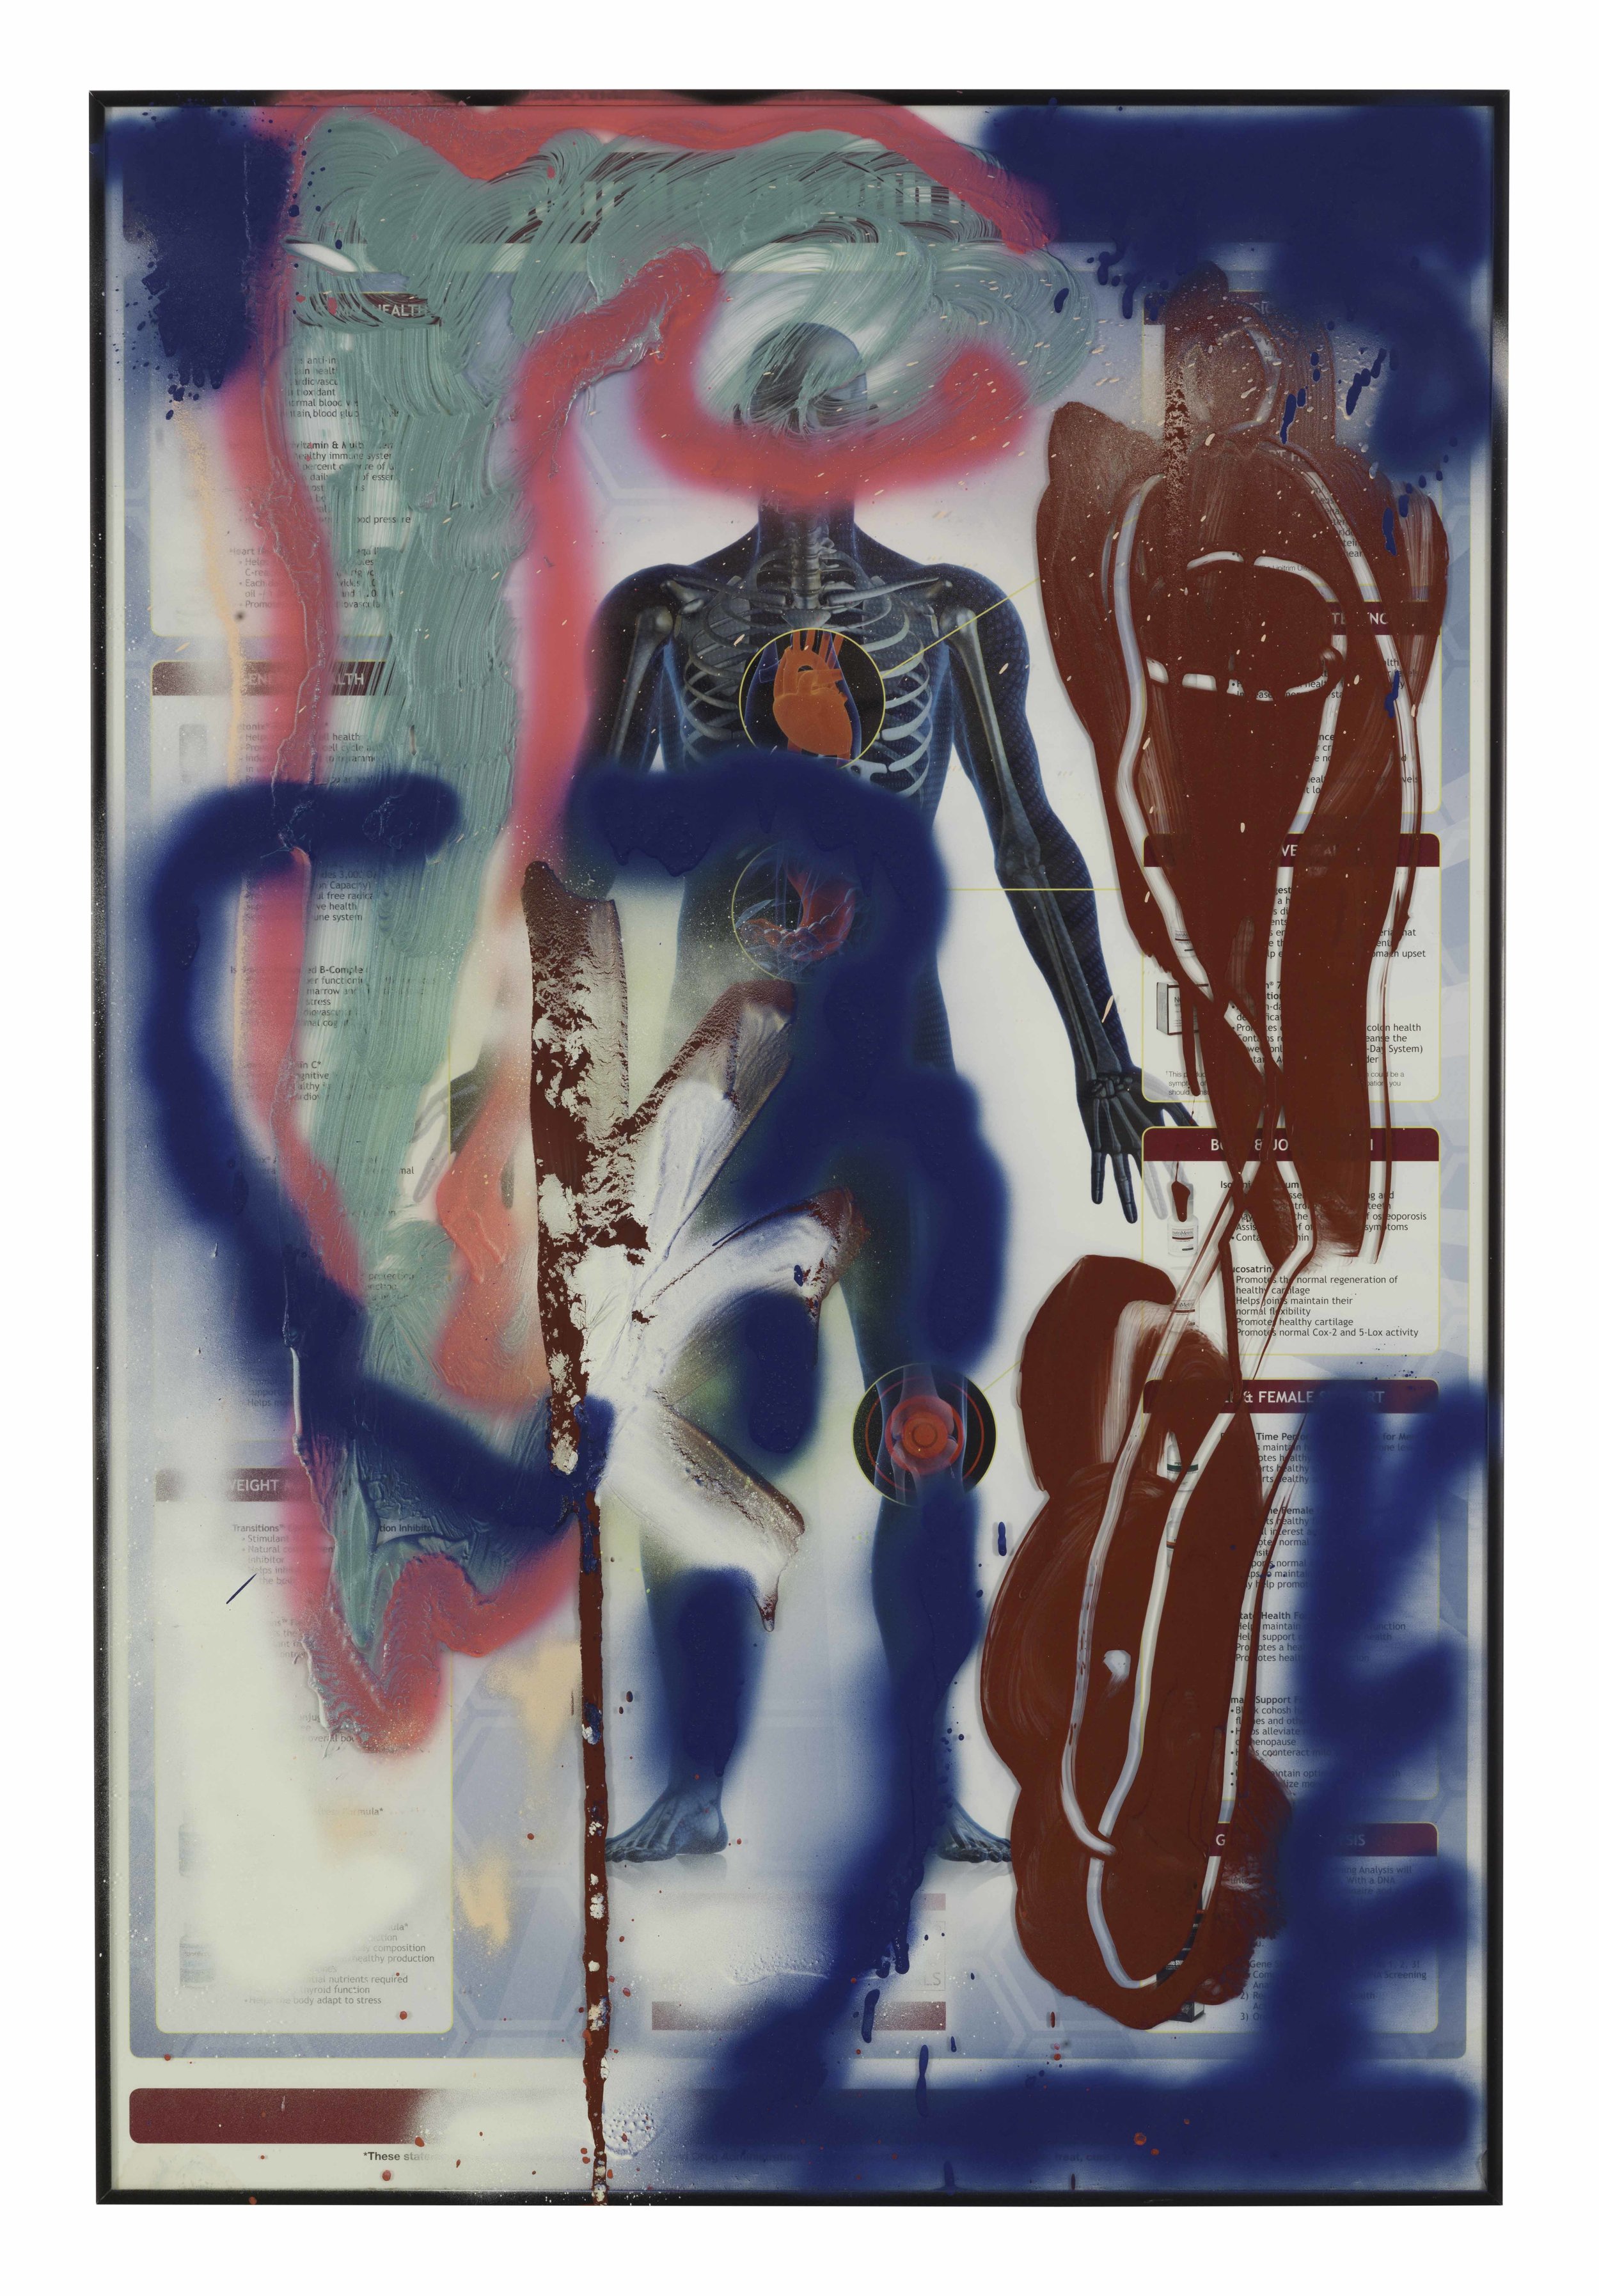  Drew Beattie and Ben Shepard  Anatomy in Red and Blue &nbsp; 2016 acrylic and spray paint on framed poster 36¼ x 24 inches 